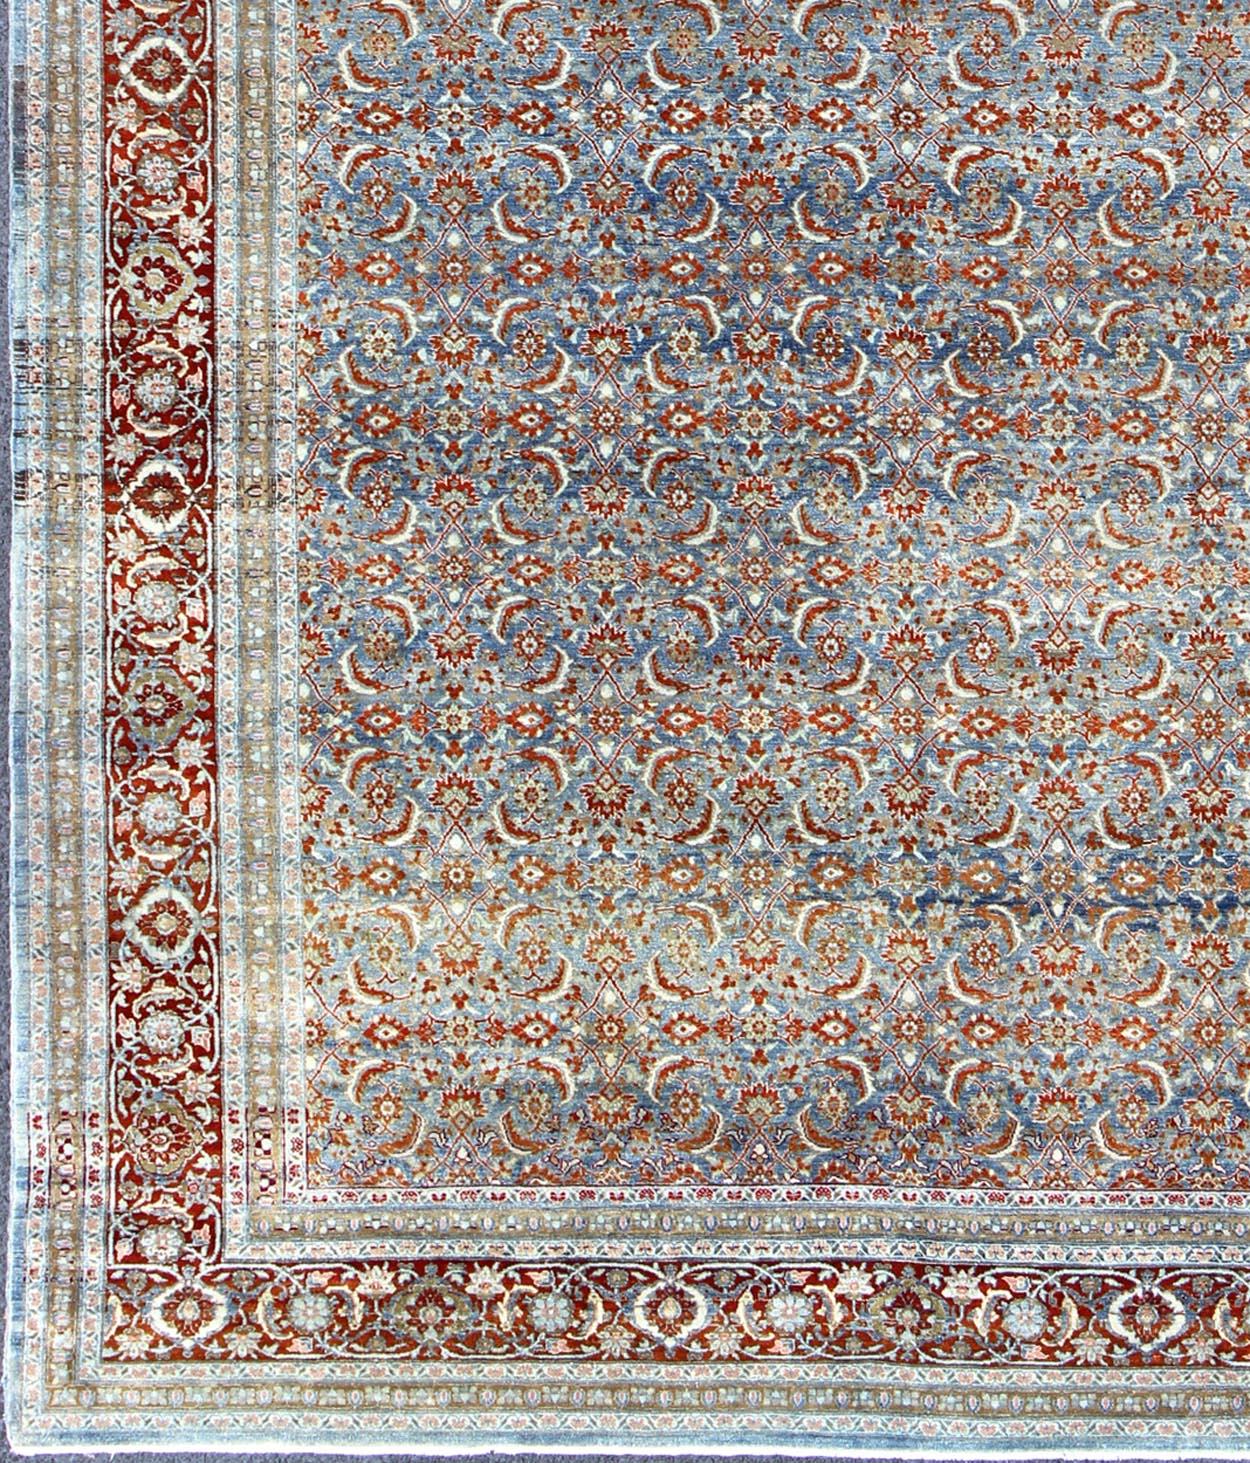 Red and light blue vintage Persian Tabriz rug with free flowing floral design, rug zir-3, country of origin / type: Iran / Tabriz, circa 1910

This magnificent early 20th century Persian Tabriz rug bears a beautiful, all-over, free-flowing Herati